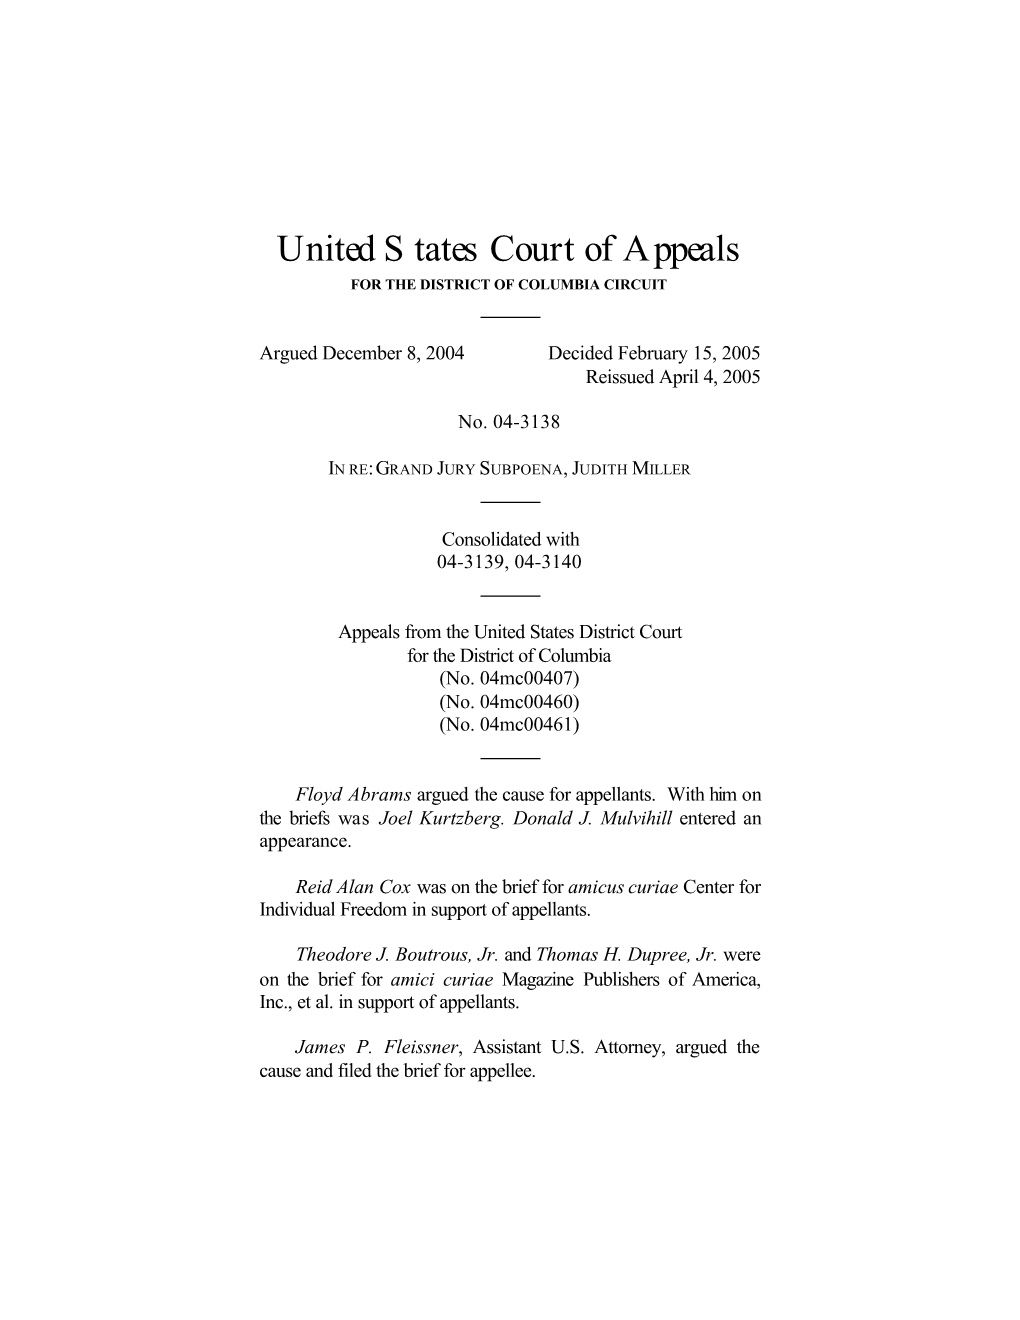 US Court of Appeals for the District of Columbia, Opinion